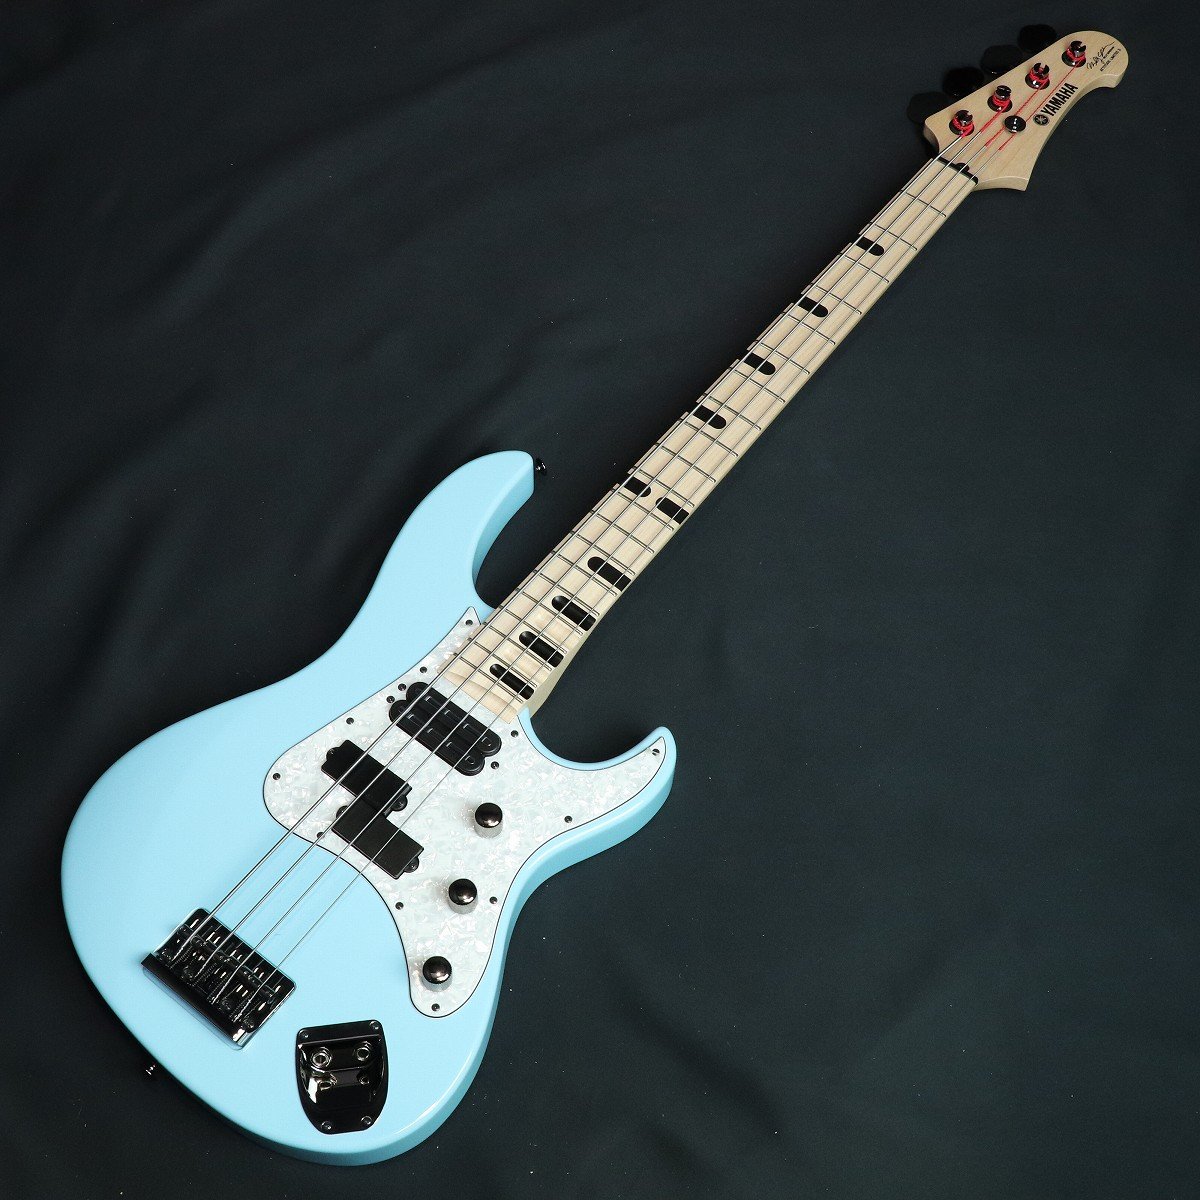 [SN IJZ007E] YAMAHA / Billy Sheehan Signature ATTITUDE LIMITED 3 Sonic Blue [Class B Outlet Item]. [09]